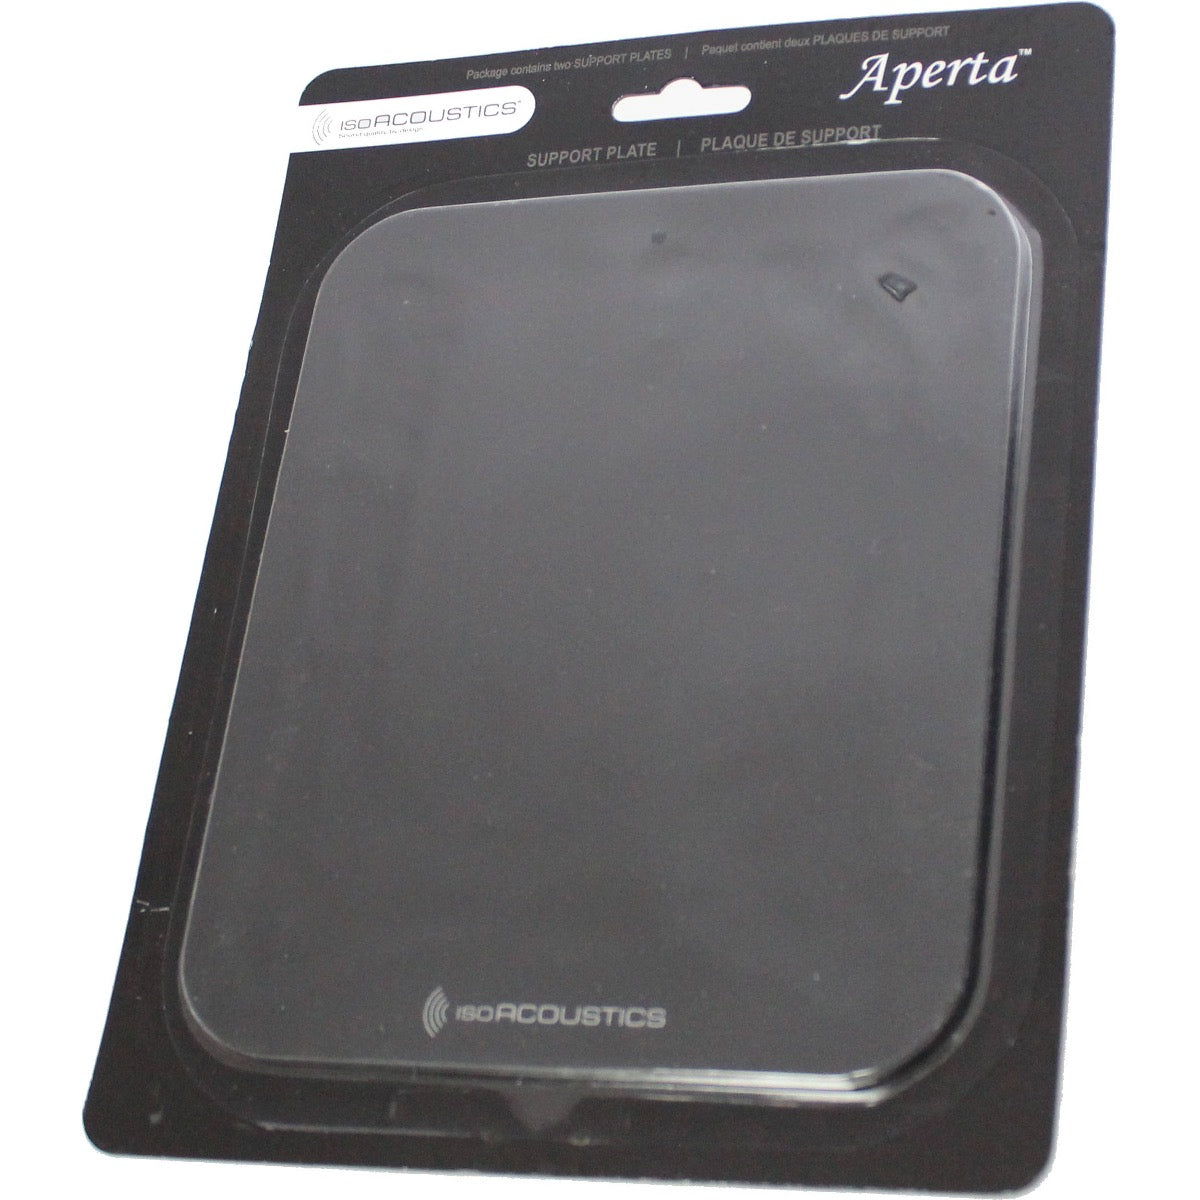 IsoAcoustic Aperta Plate - Pack of 2